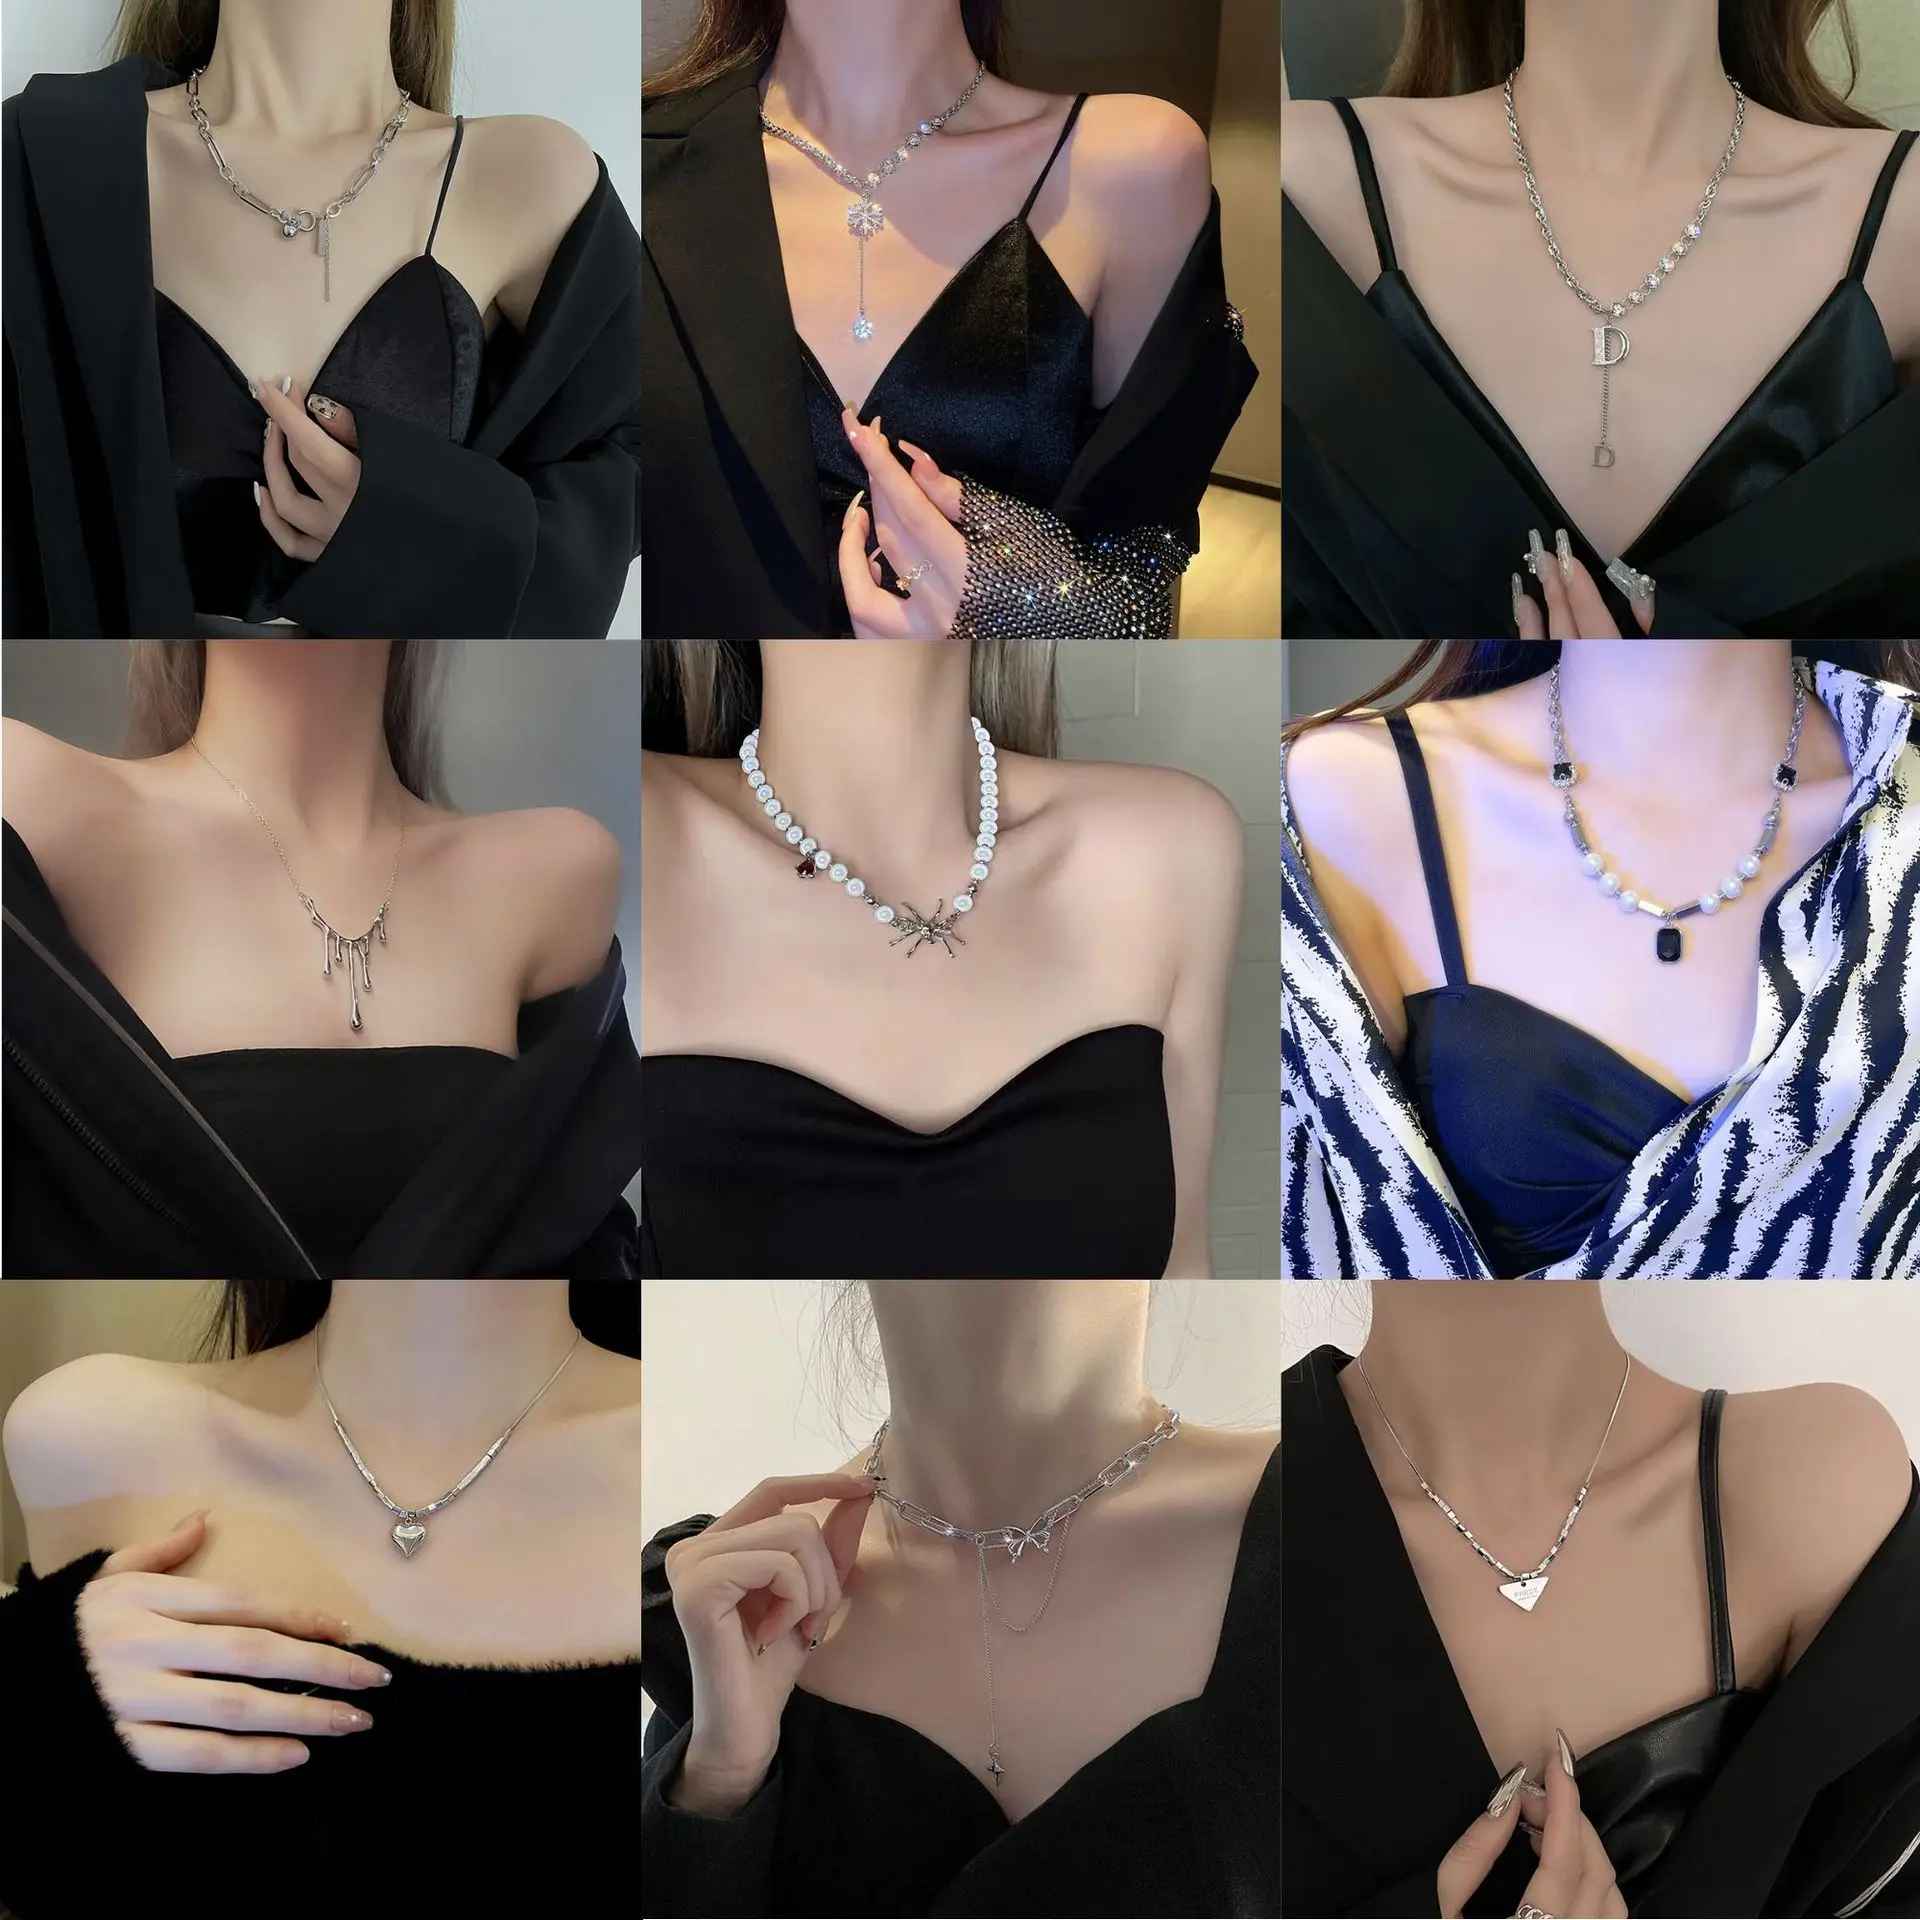 

Kpop Heart Pendant Necklace Metal Alloy Two Layer Metal Chain Necklace For Women Lady Celebration Gifts 2021 streetwear Jewelry